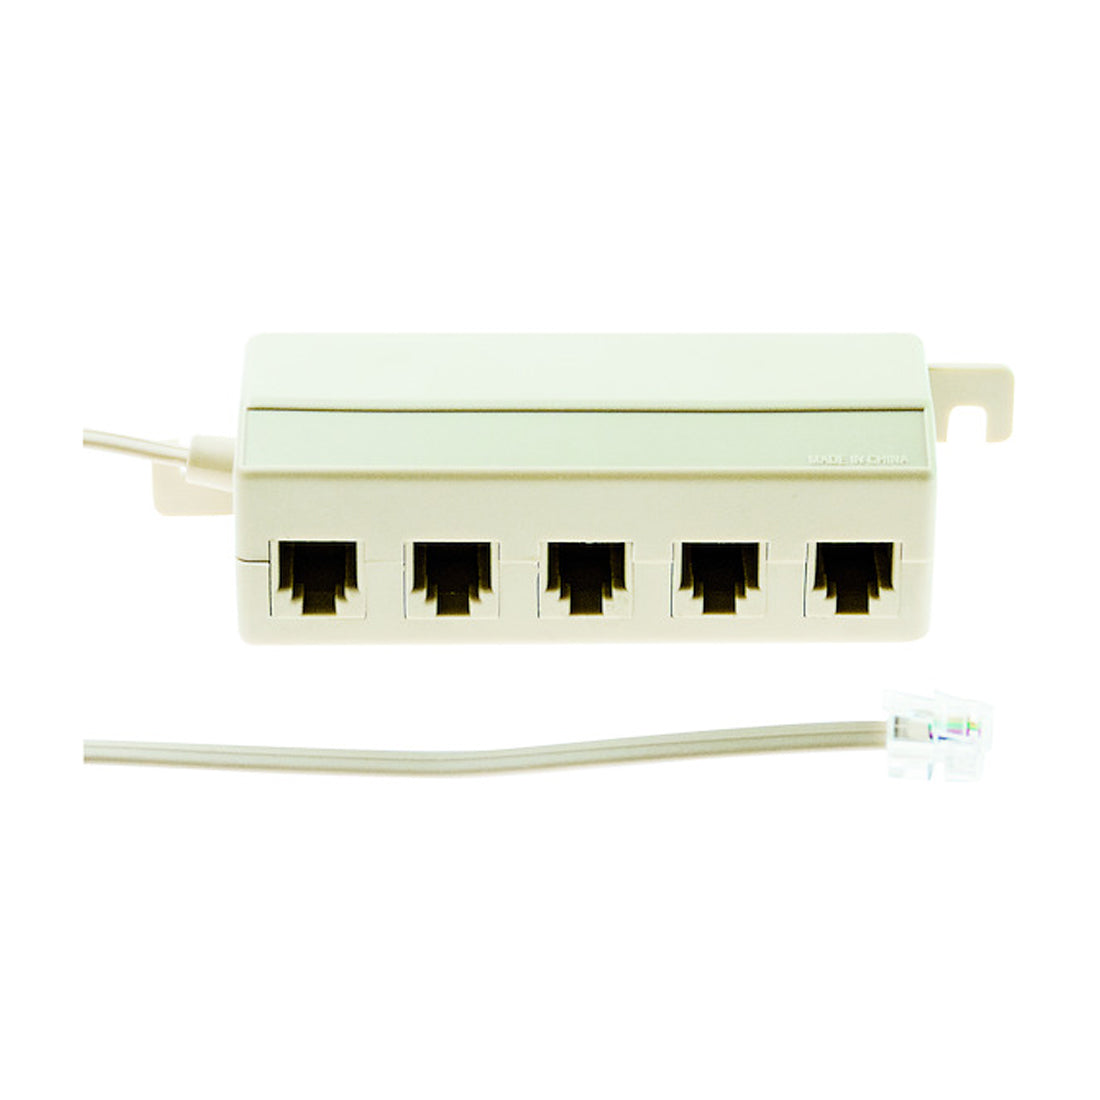 Life Modular multiple socket adapter 1 plug 5 Pin to Pin sockets for telephone network